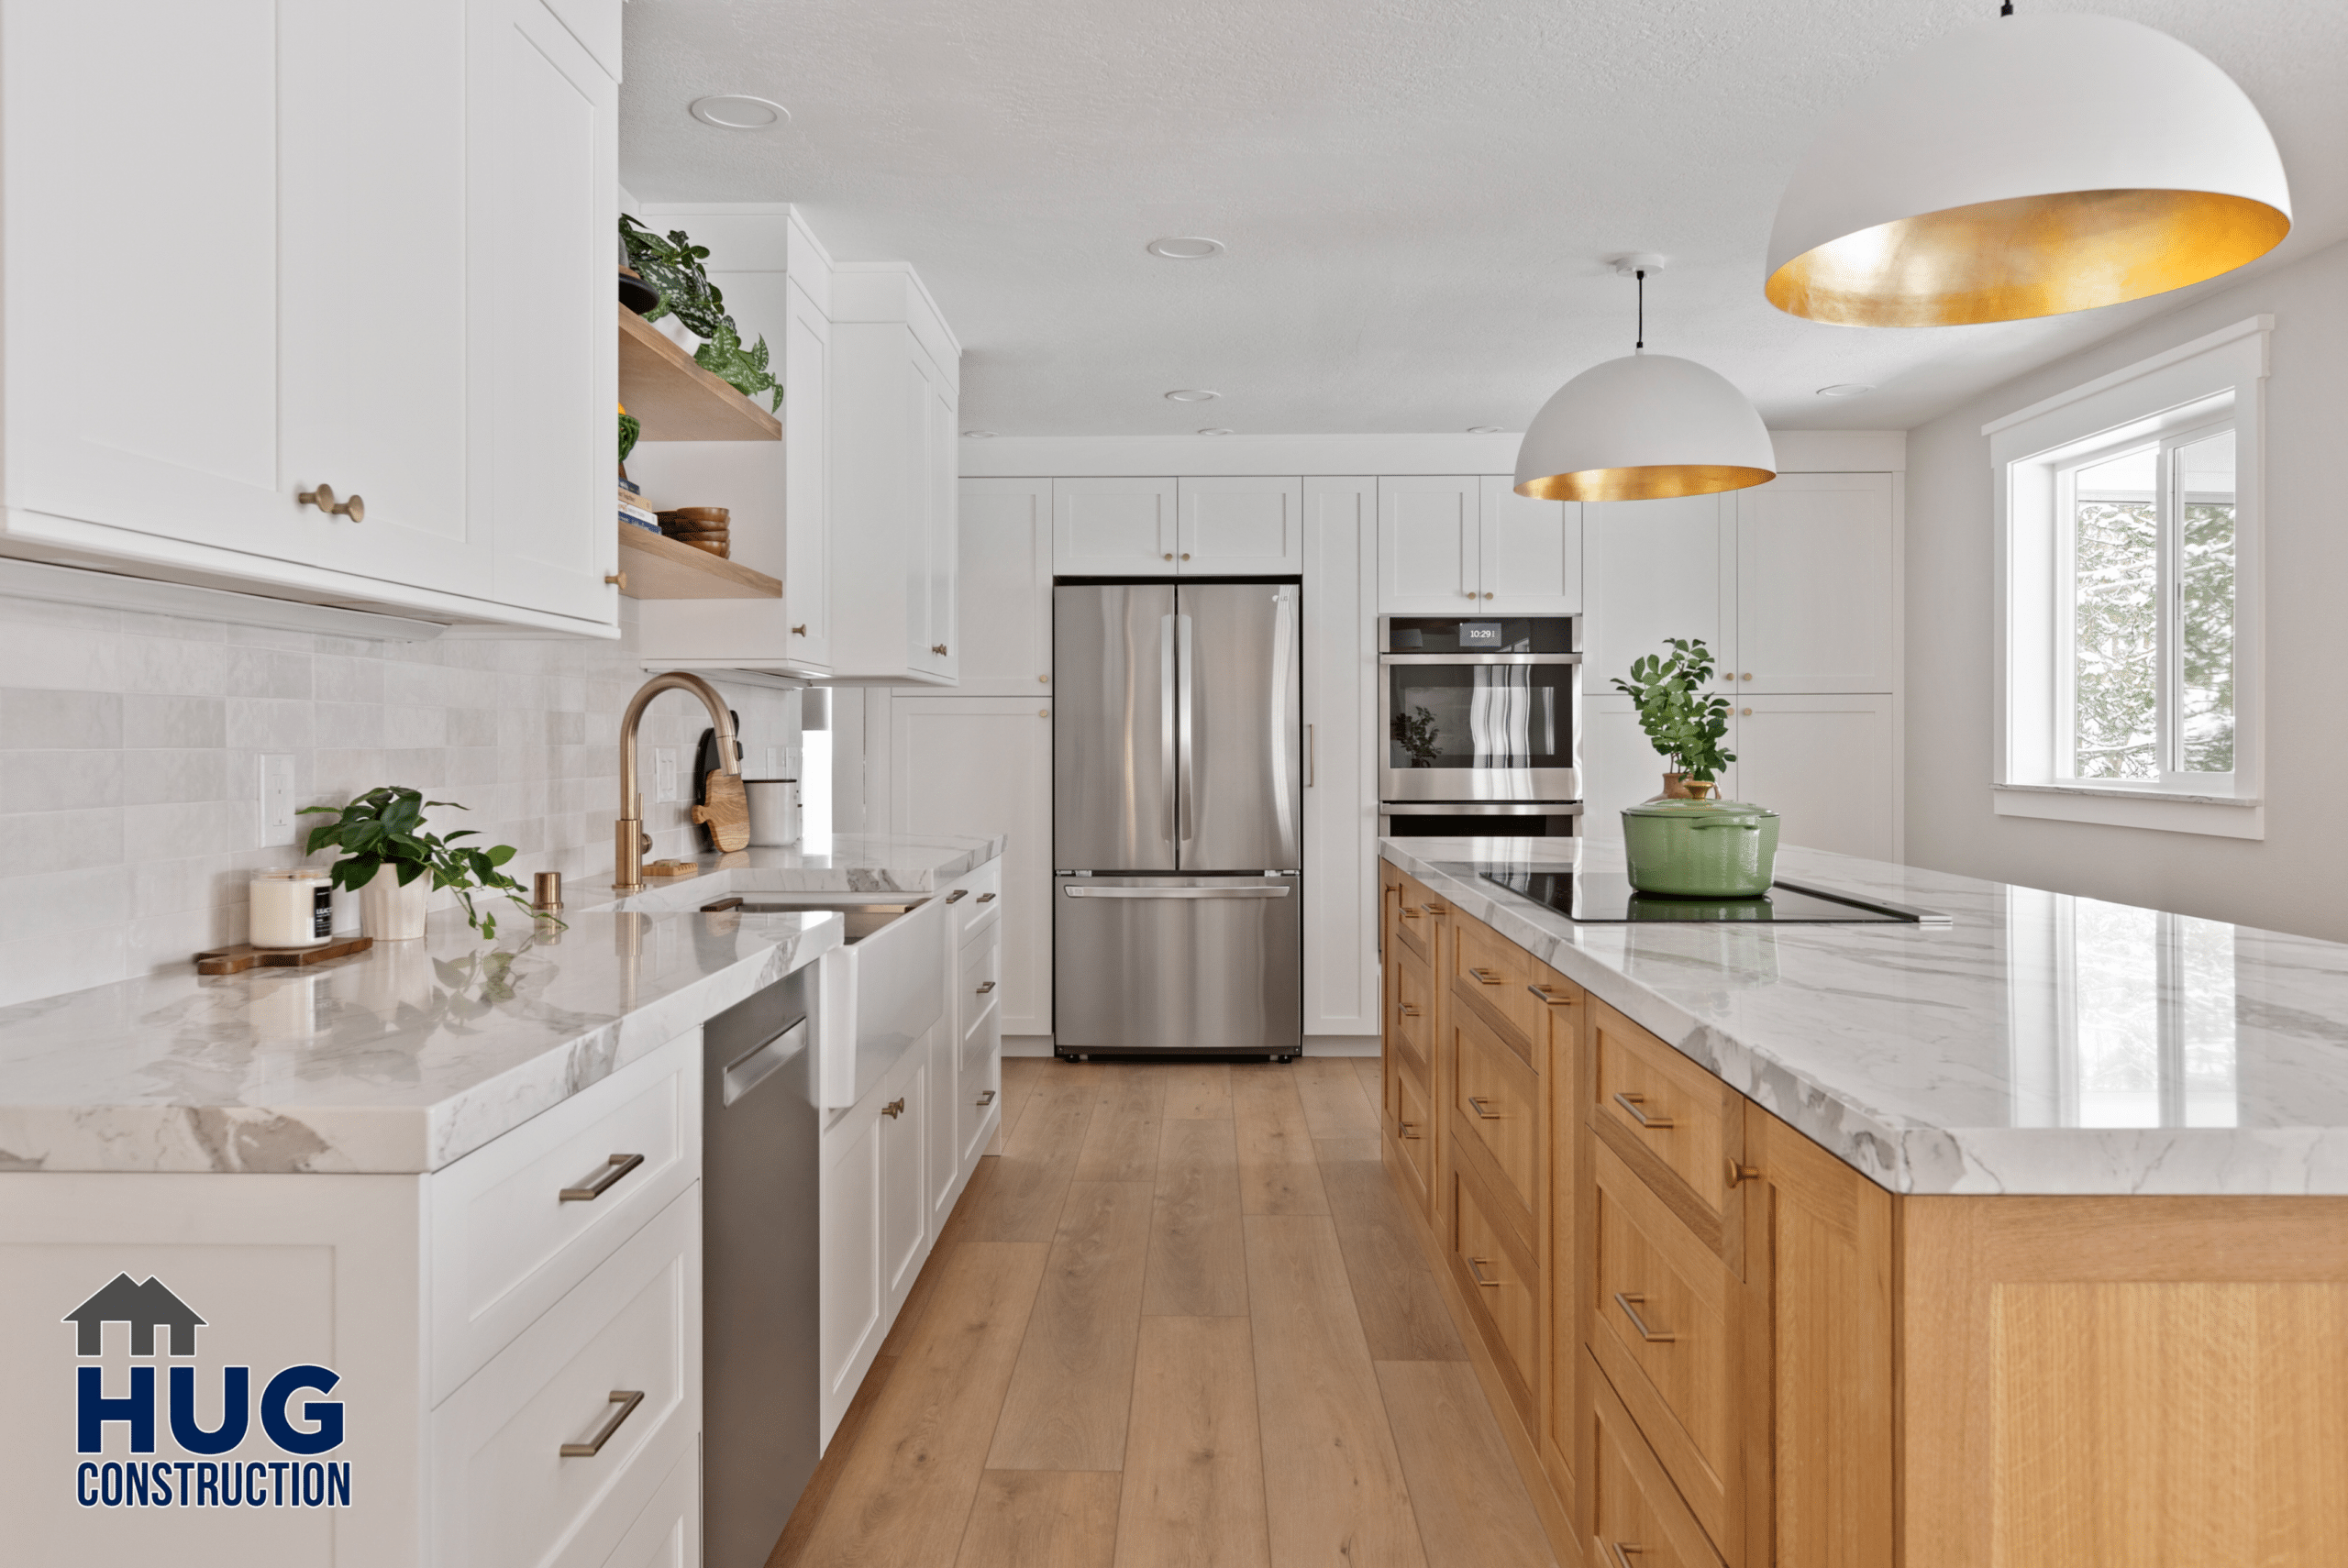 Gunning Rd interior remodel: Modern kitchen with white cabinetry, stainless steel appliances, hardwood flooring, and a central island countertop.